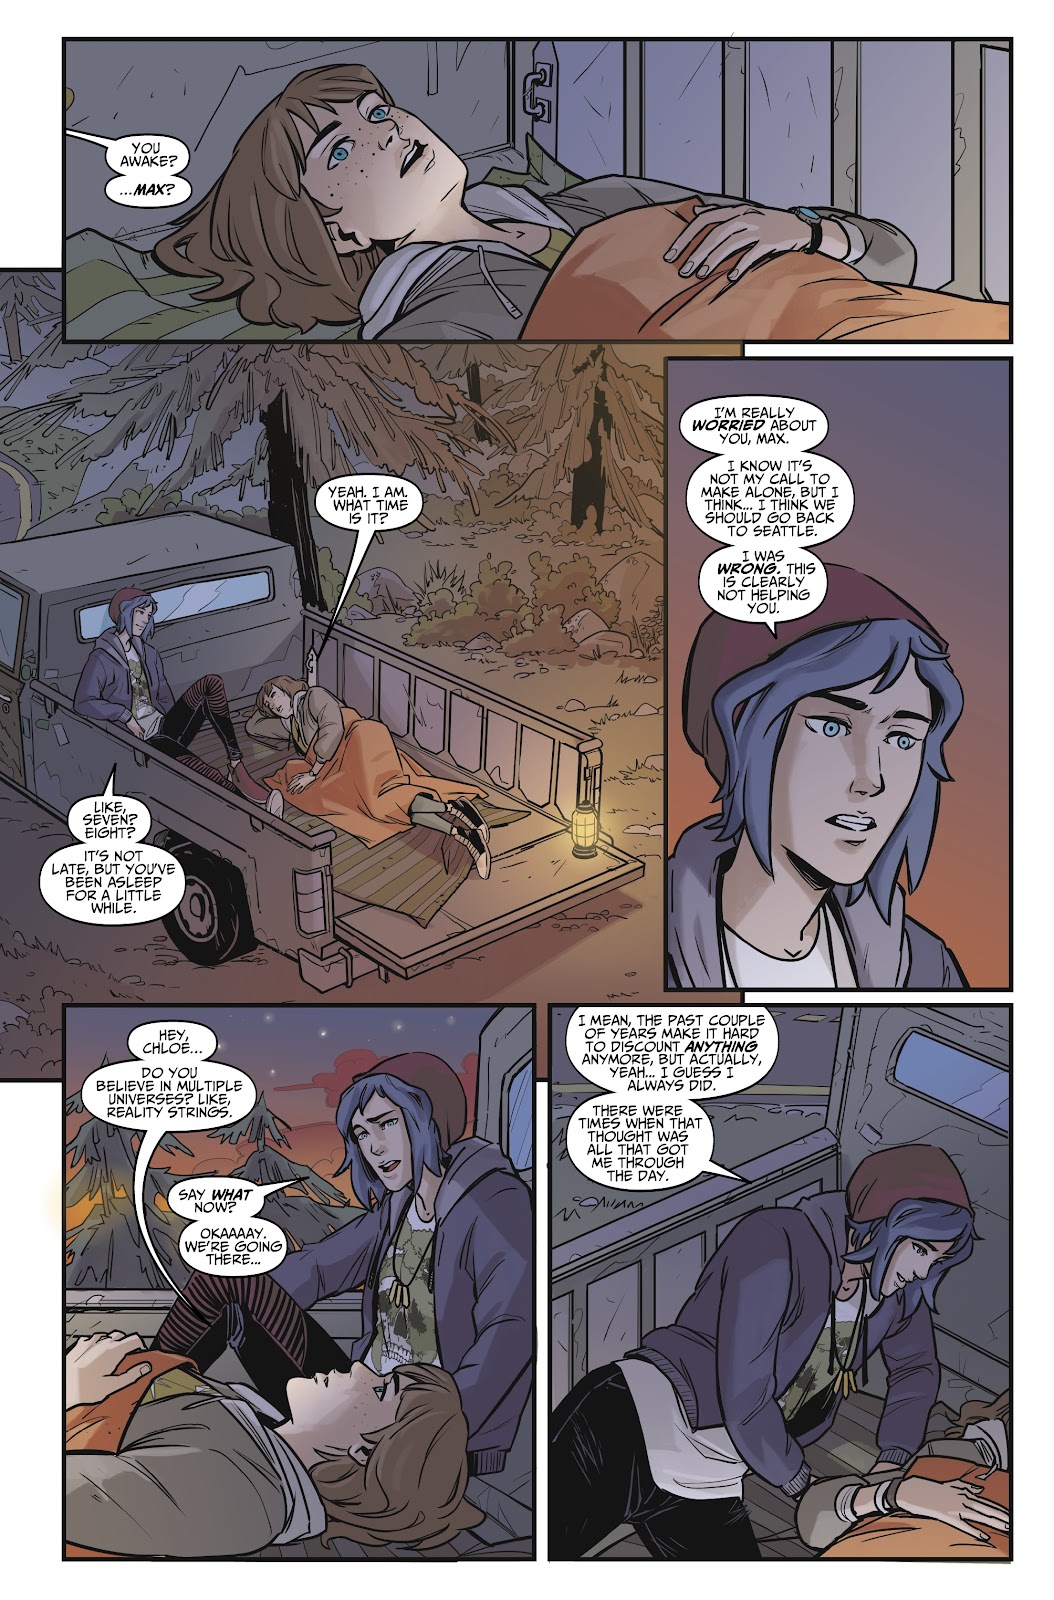 Life is Strange (2018) issue 4 - Page 11